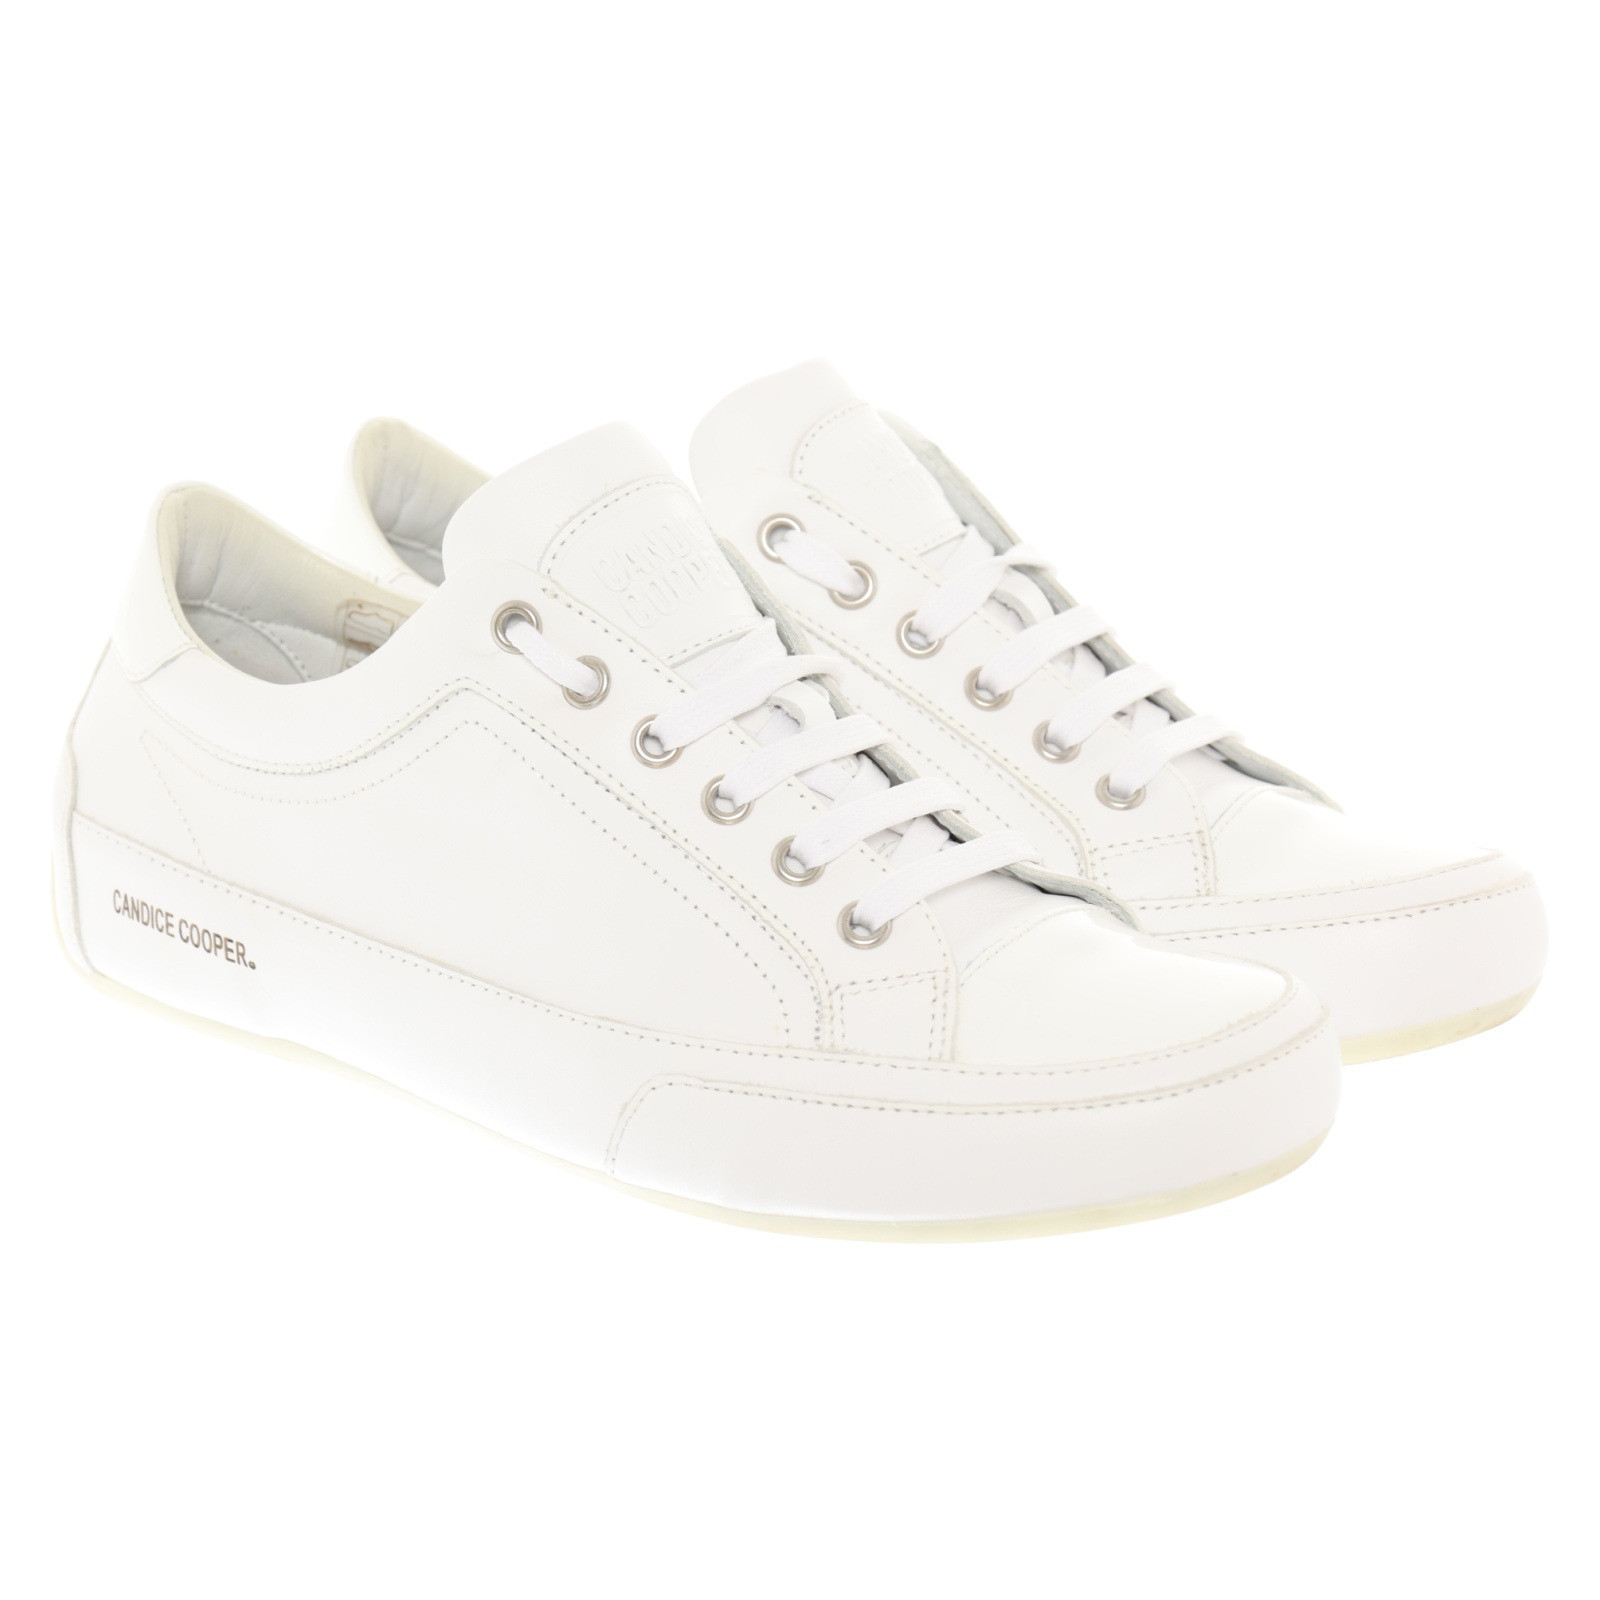 CANDICE COOPER Women's Trainers Leather in White Size: EU 40